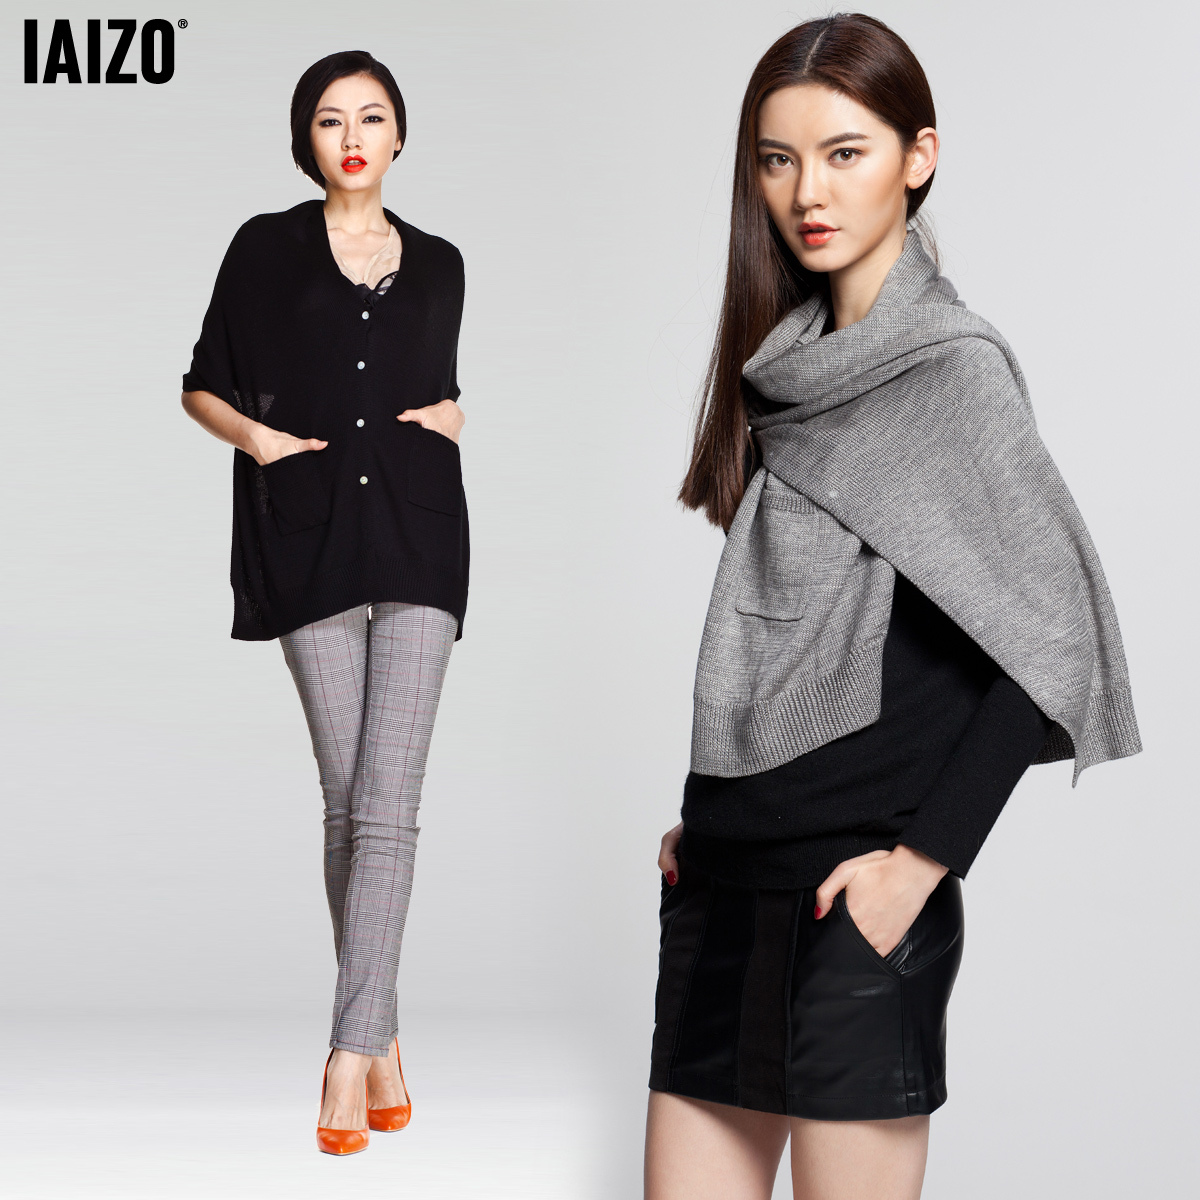 Iaizo high quality single breasted shoulder cape type sweater women's wool 11m30007